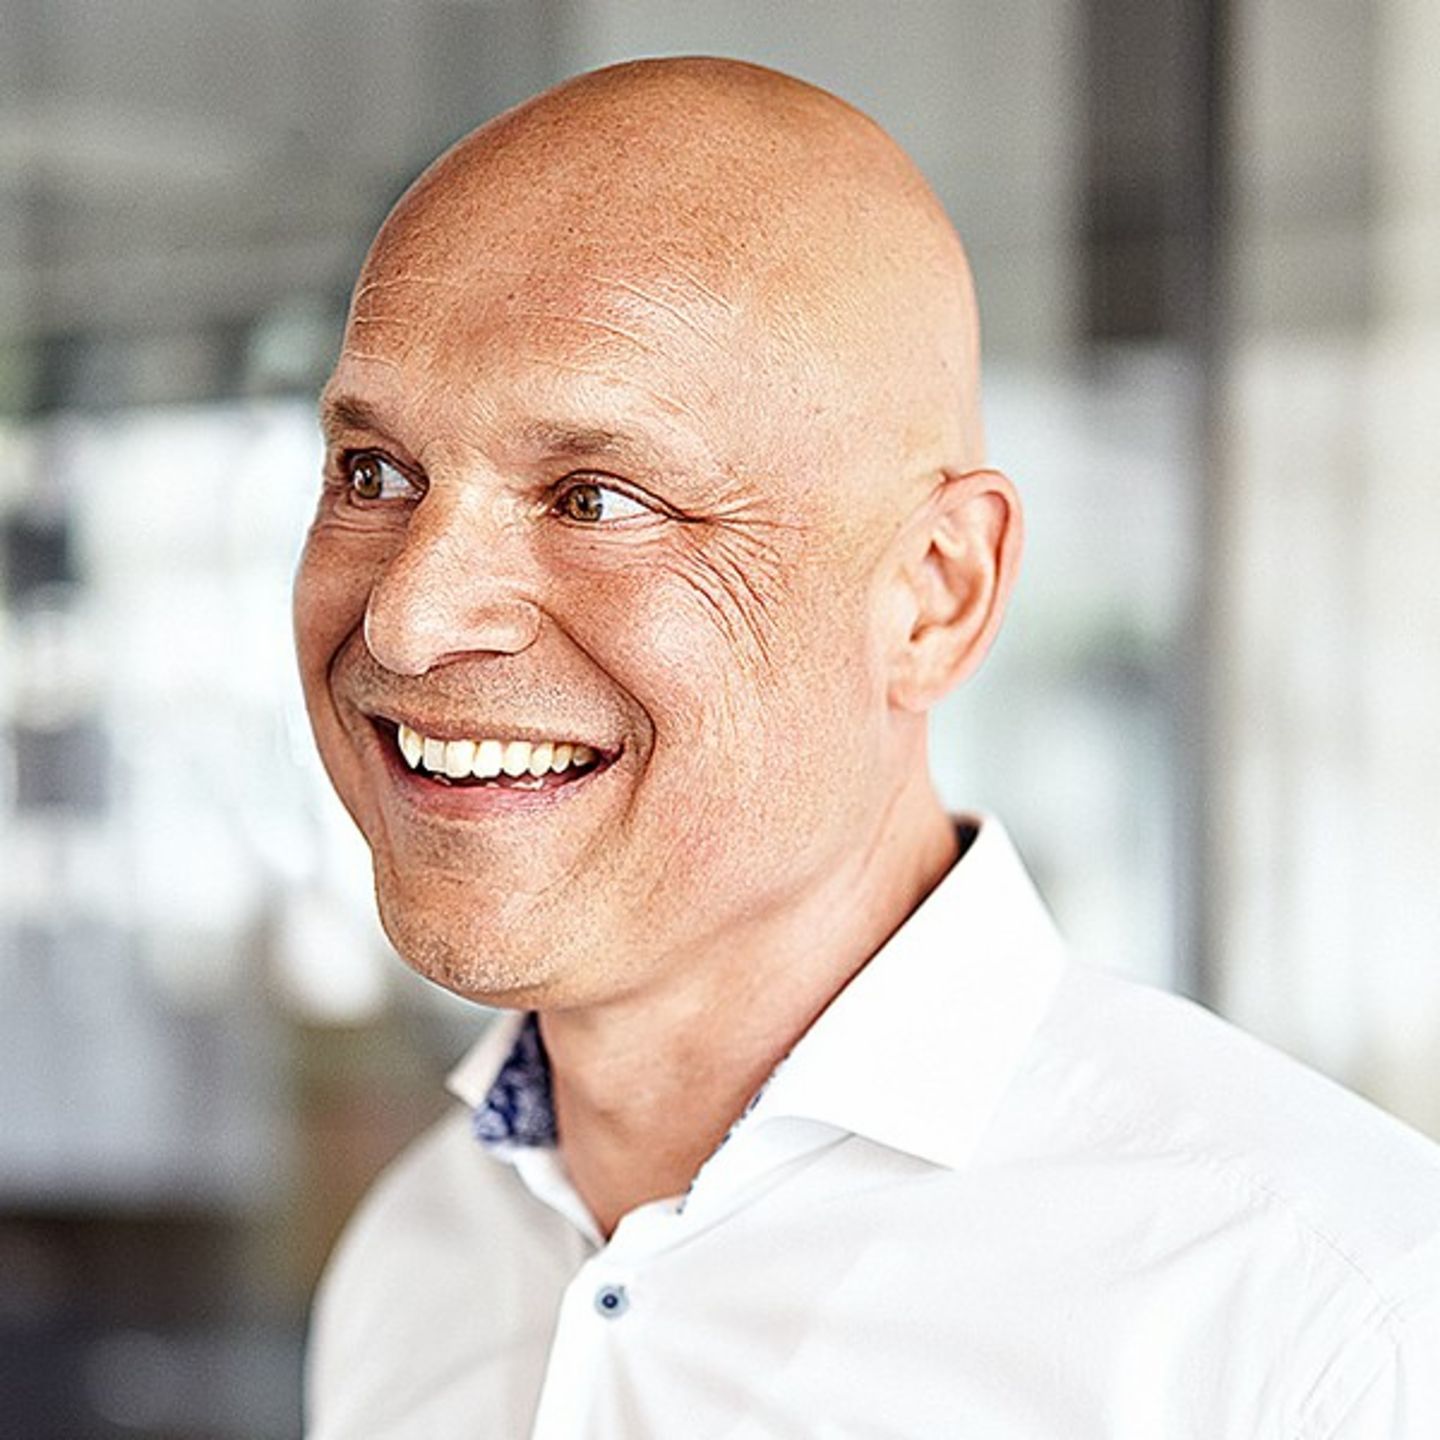 A portrait photo shows Andreas Behmenburg, Head of Sales at EOS Germany